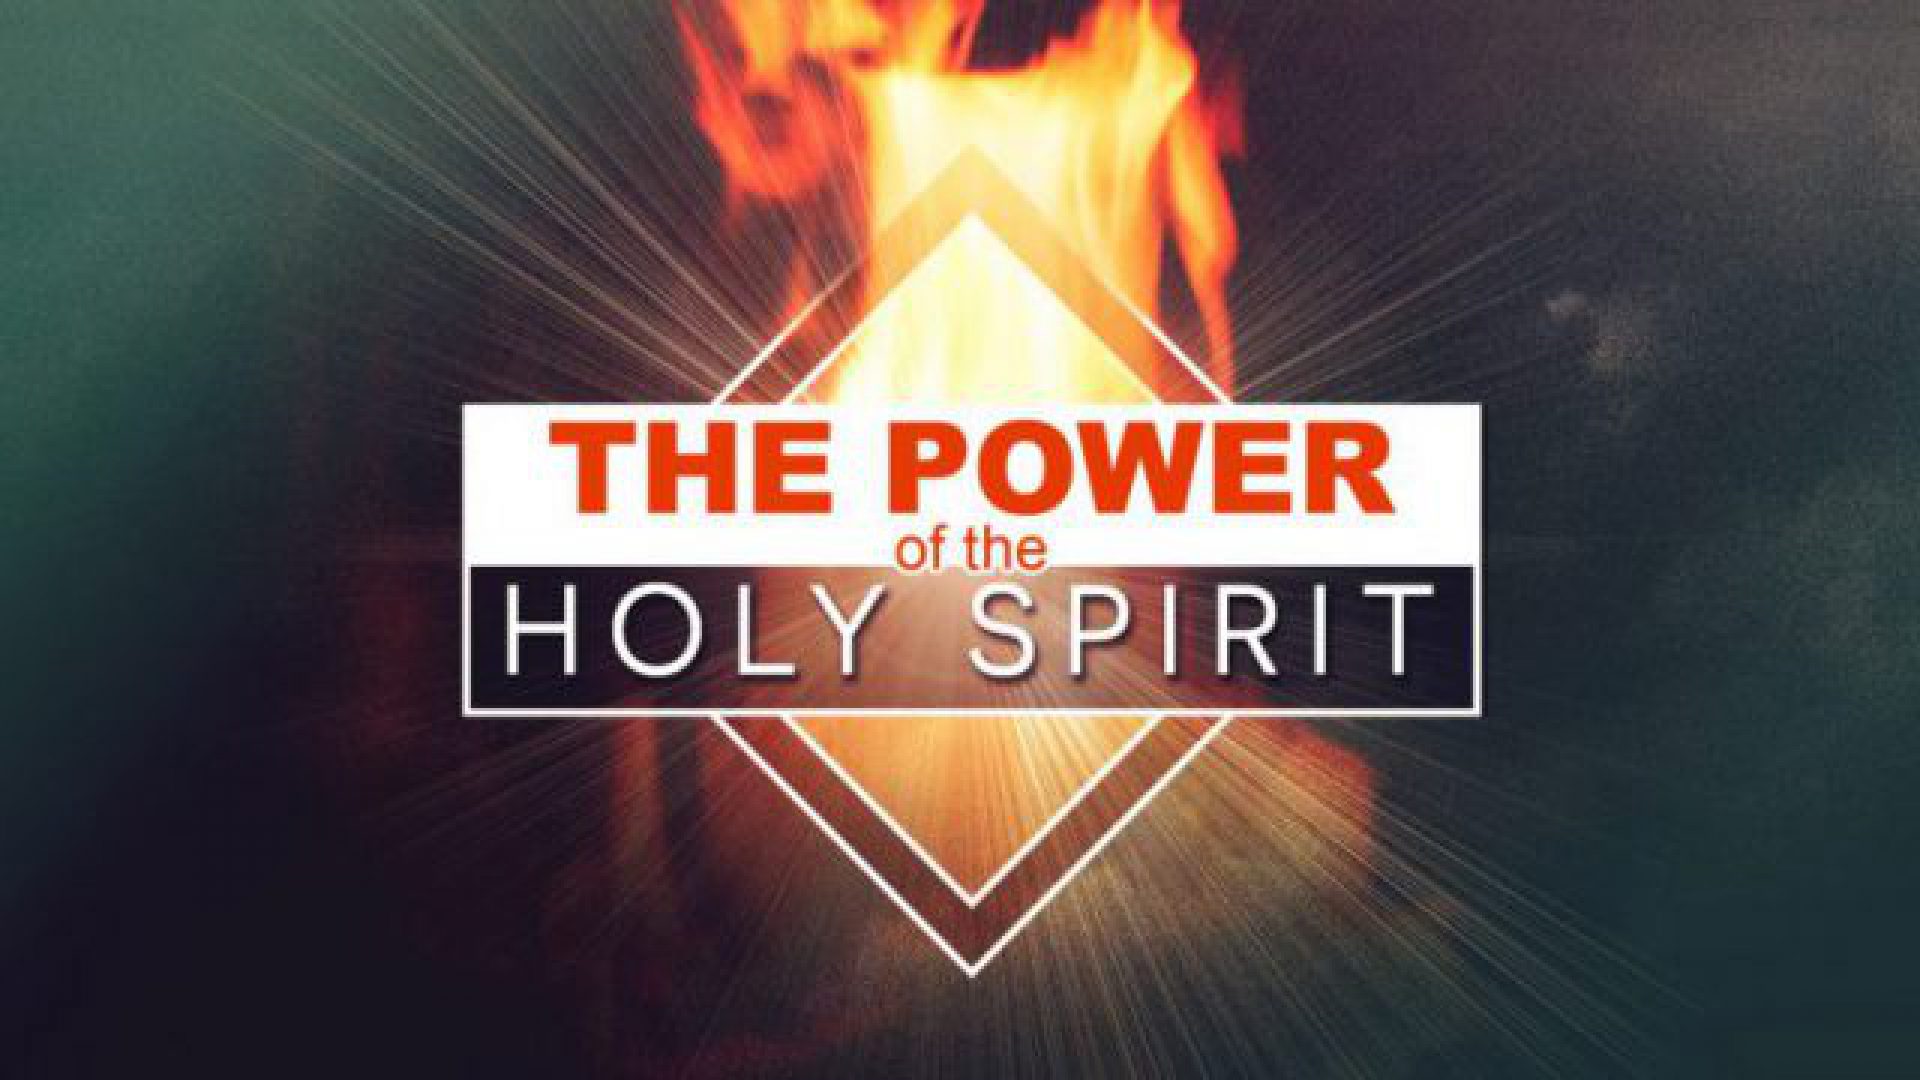 THE POWER OF THE SPIRIT